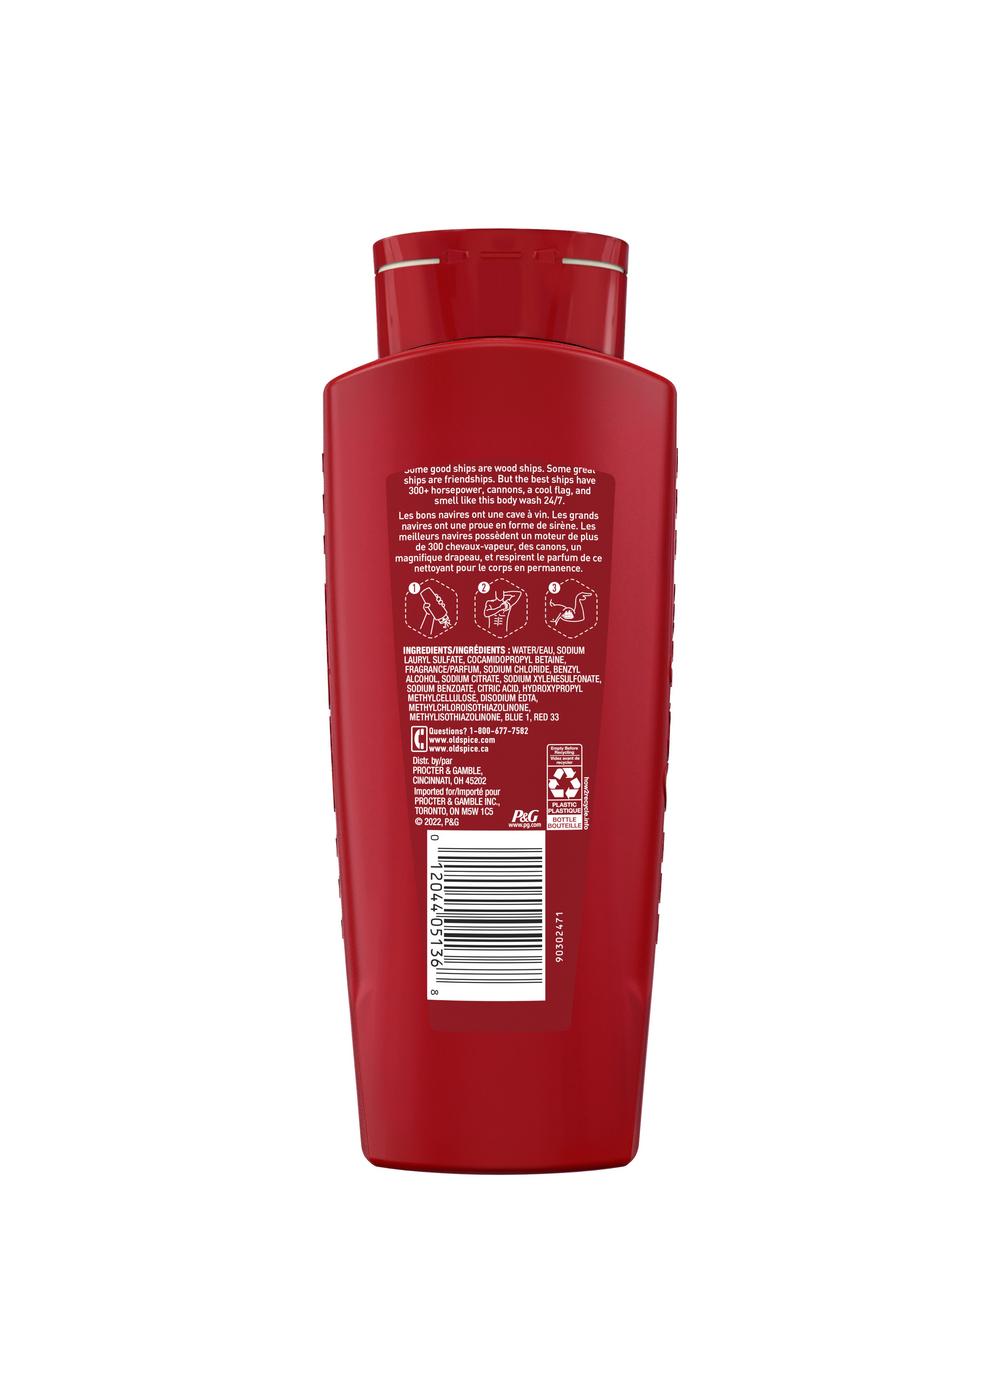 Old Spice Body Wash - Captain; image 2 of 2